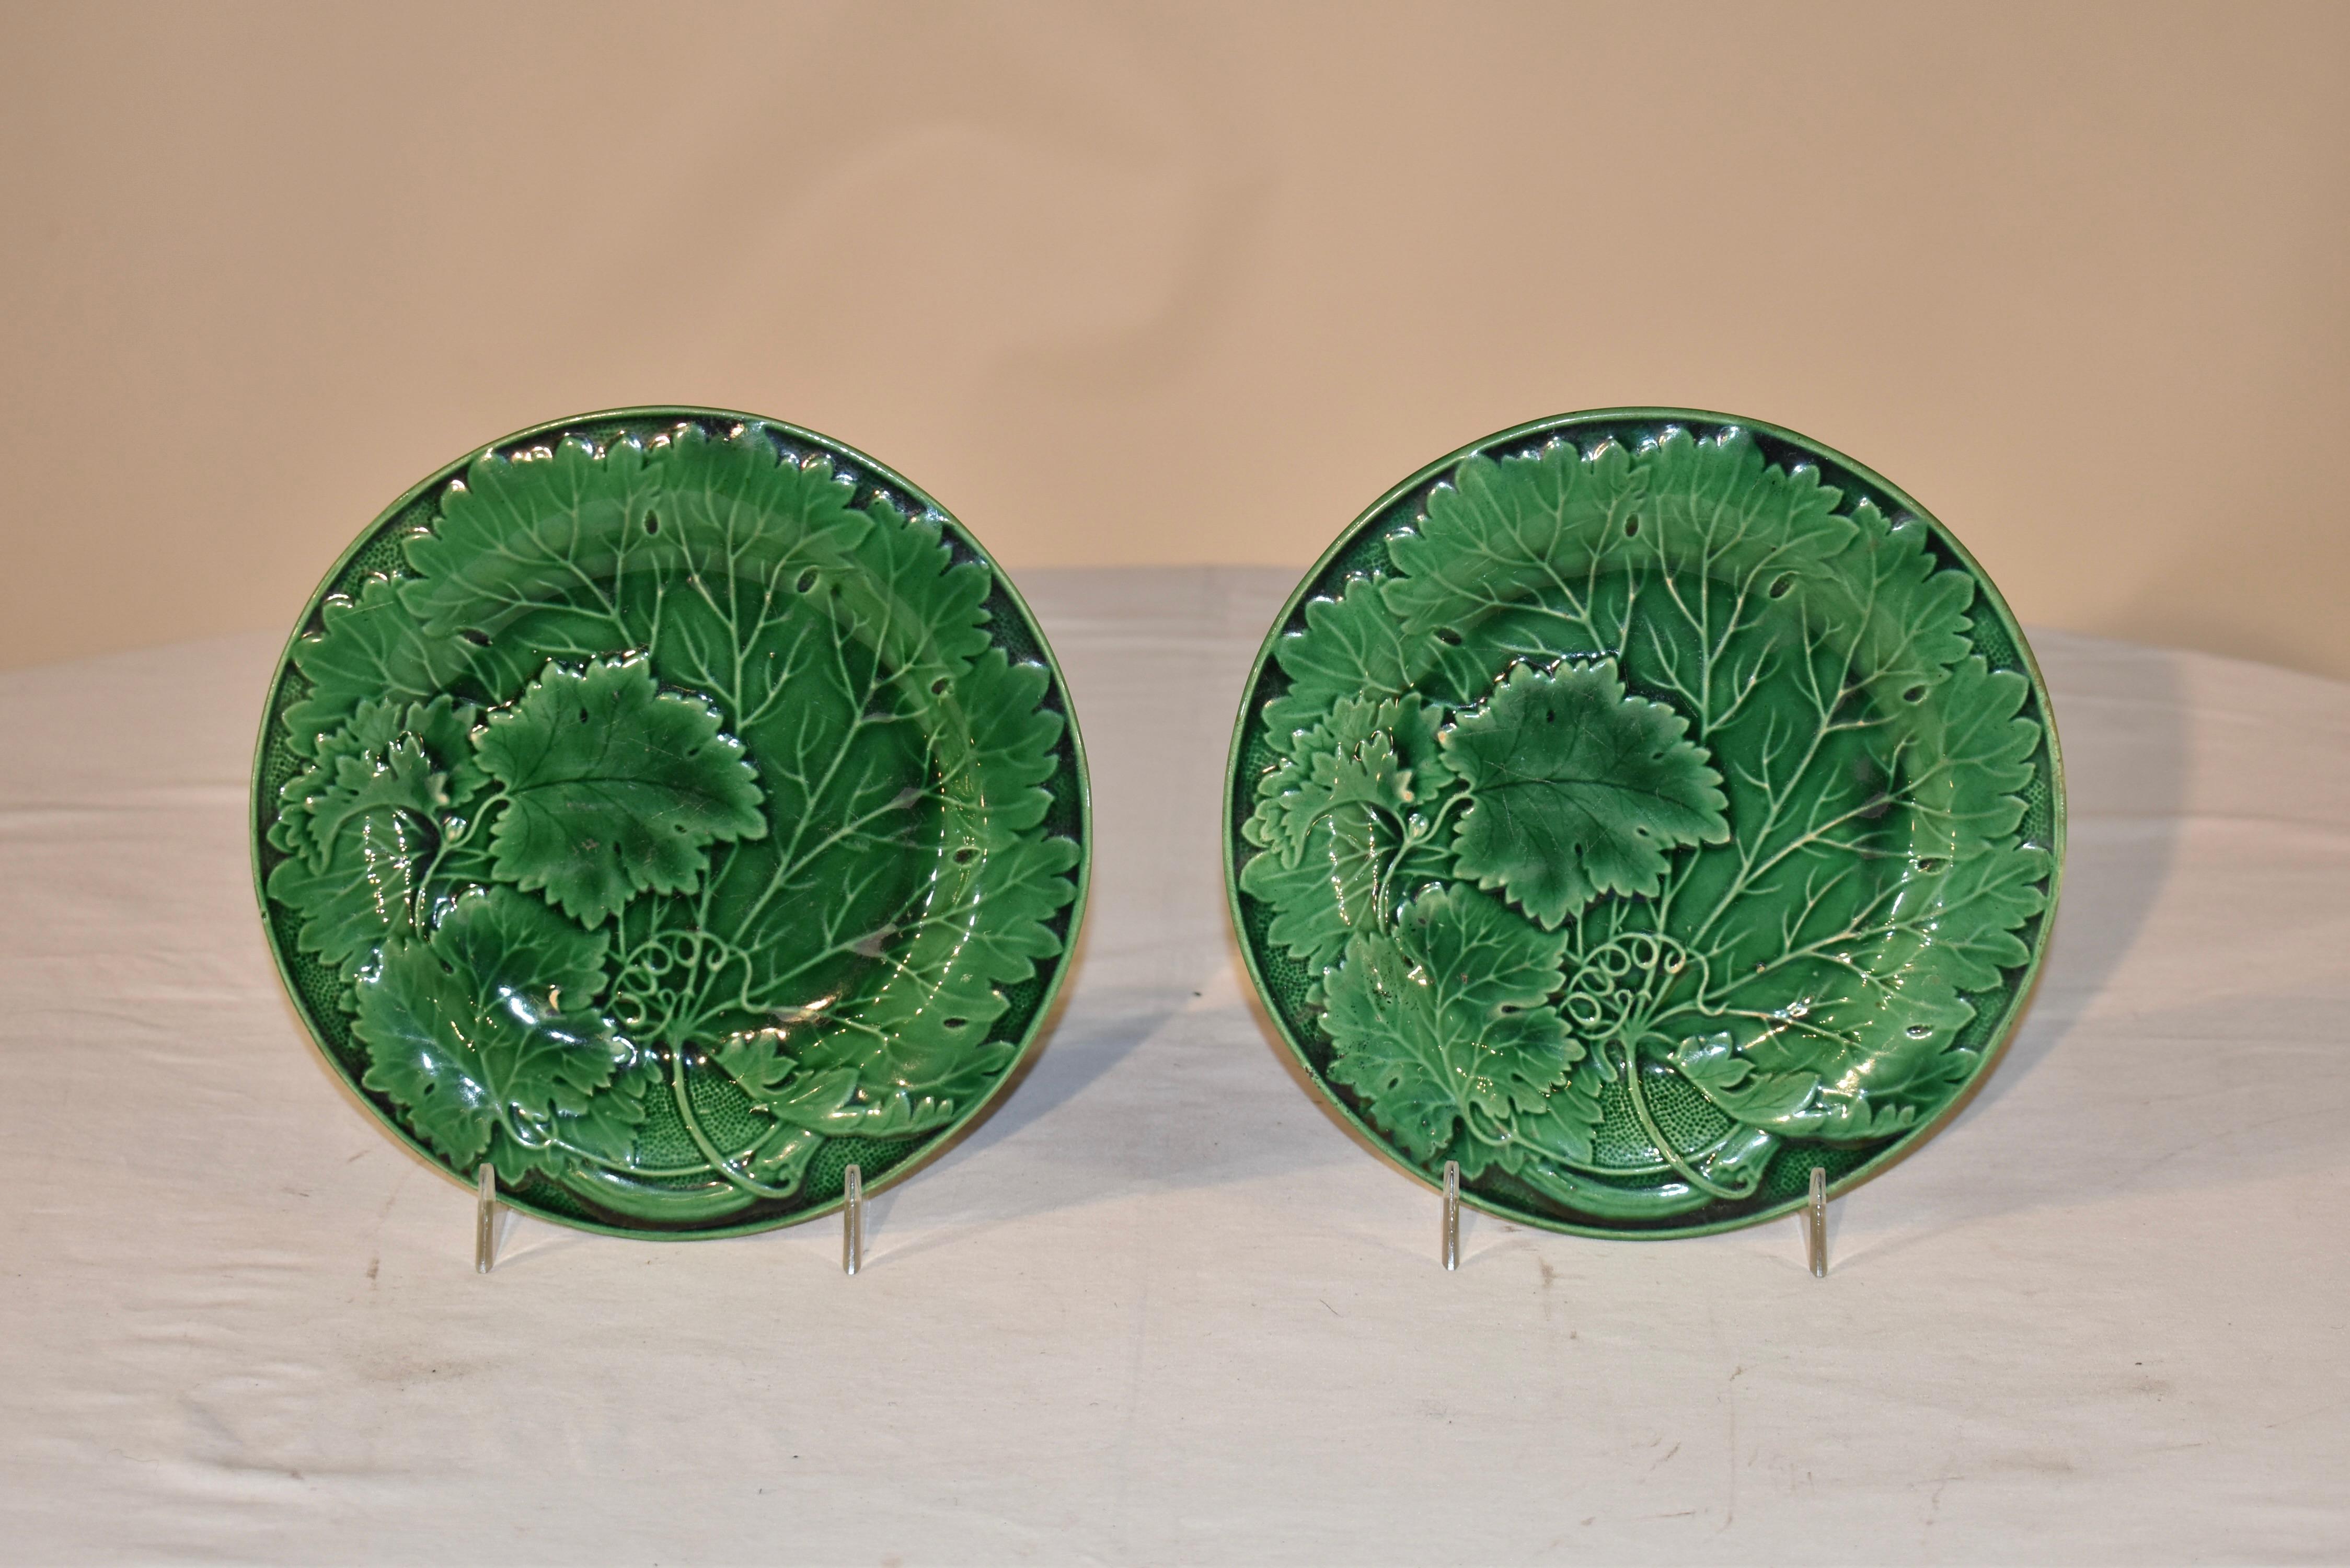 Pair of lovely 19th century English majolica plates in green. The pattern is a large single leaf with smaller leaves overlapping and stippling along a molded border edge. Plate stands not included.